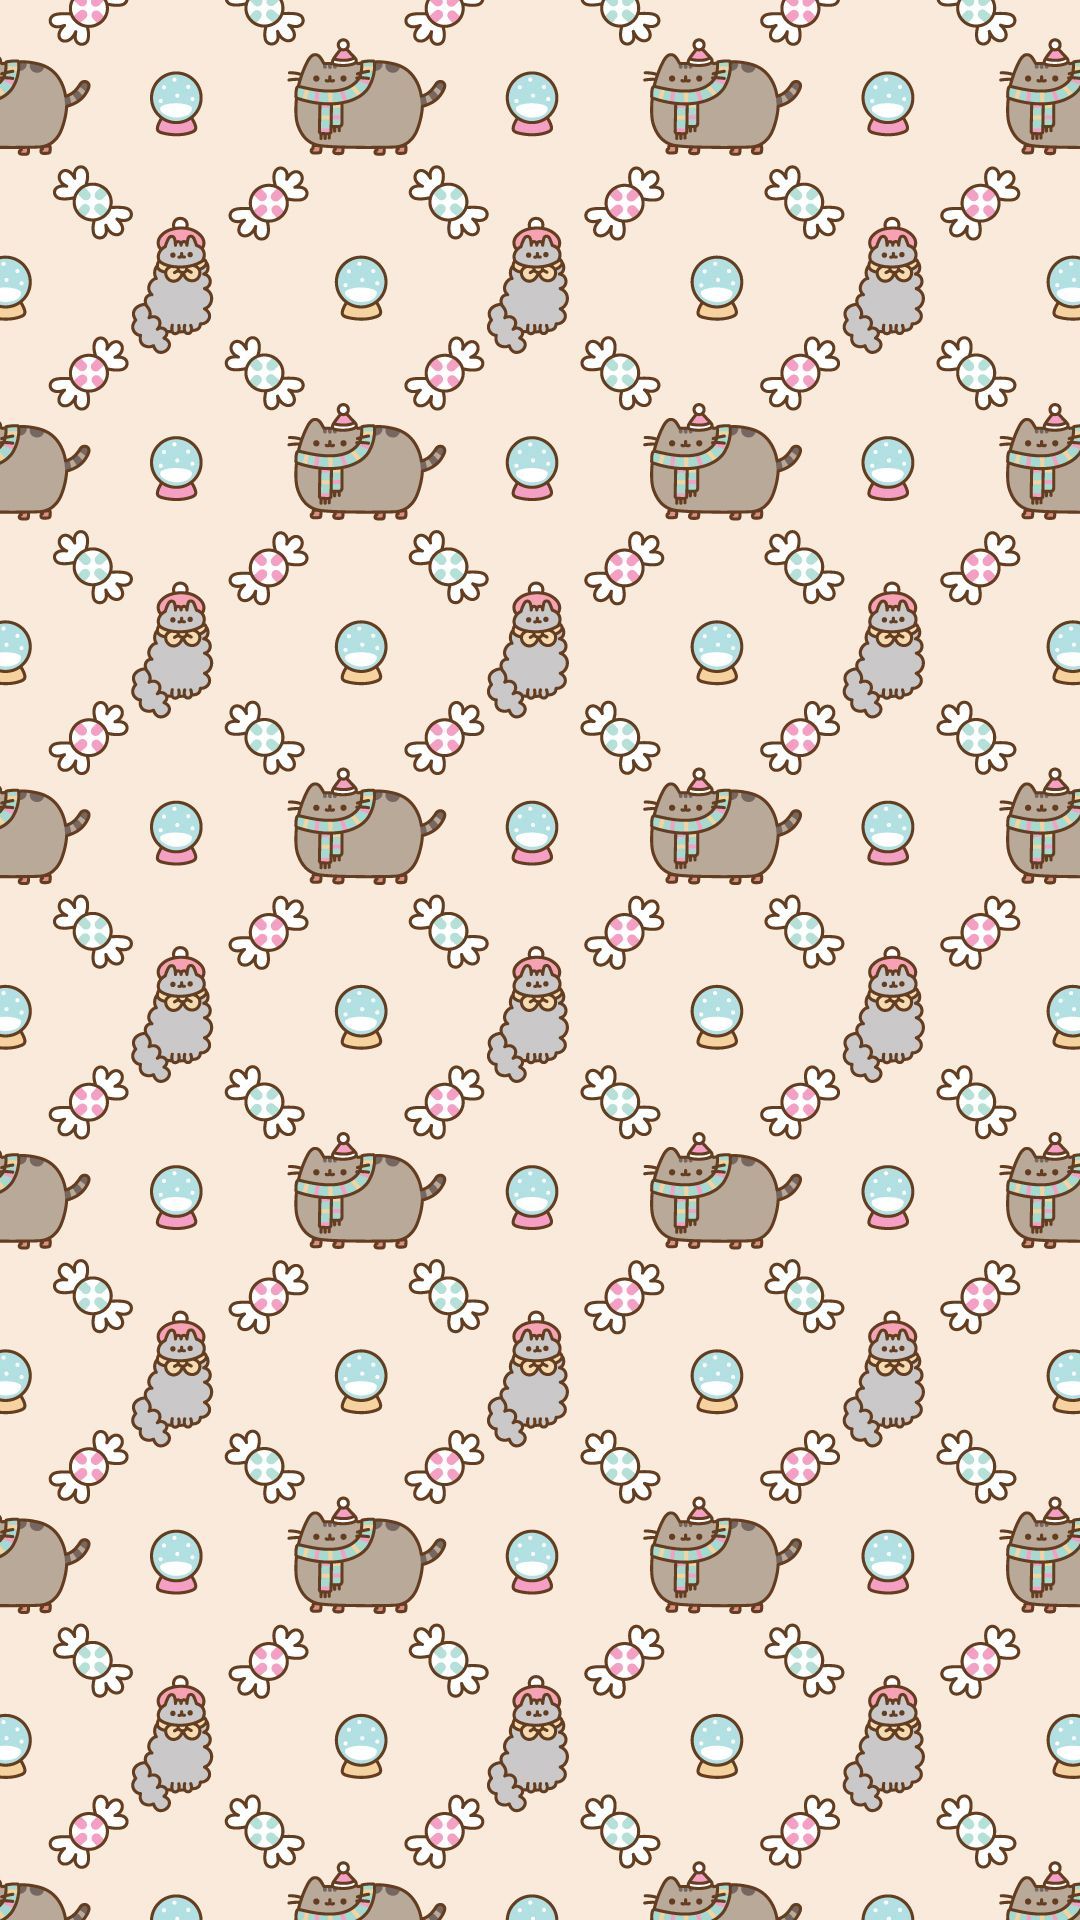 Android Free Pusheen Christmas Wallpaper. Pusheen christmas, Wallpaper iphone cute, Pusheen cat